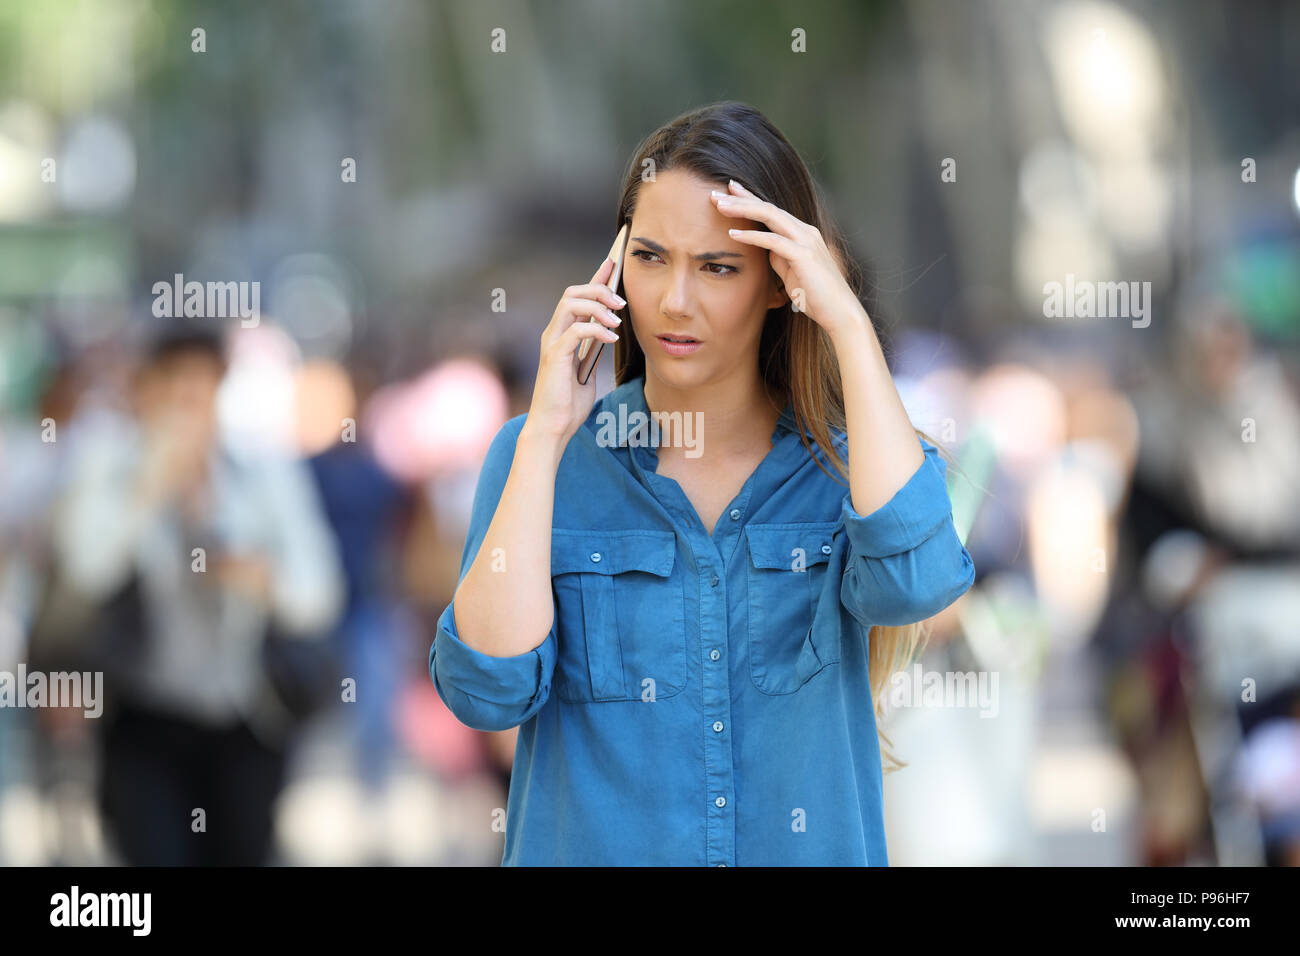 Fronf view of a worried woman talks on the phone walking in the street Stock Photo